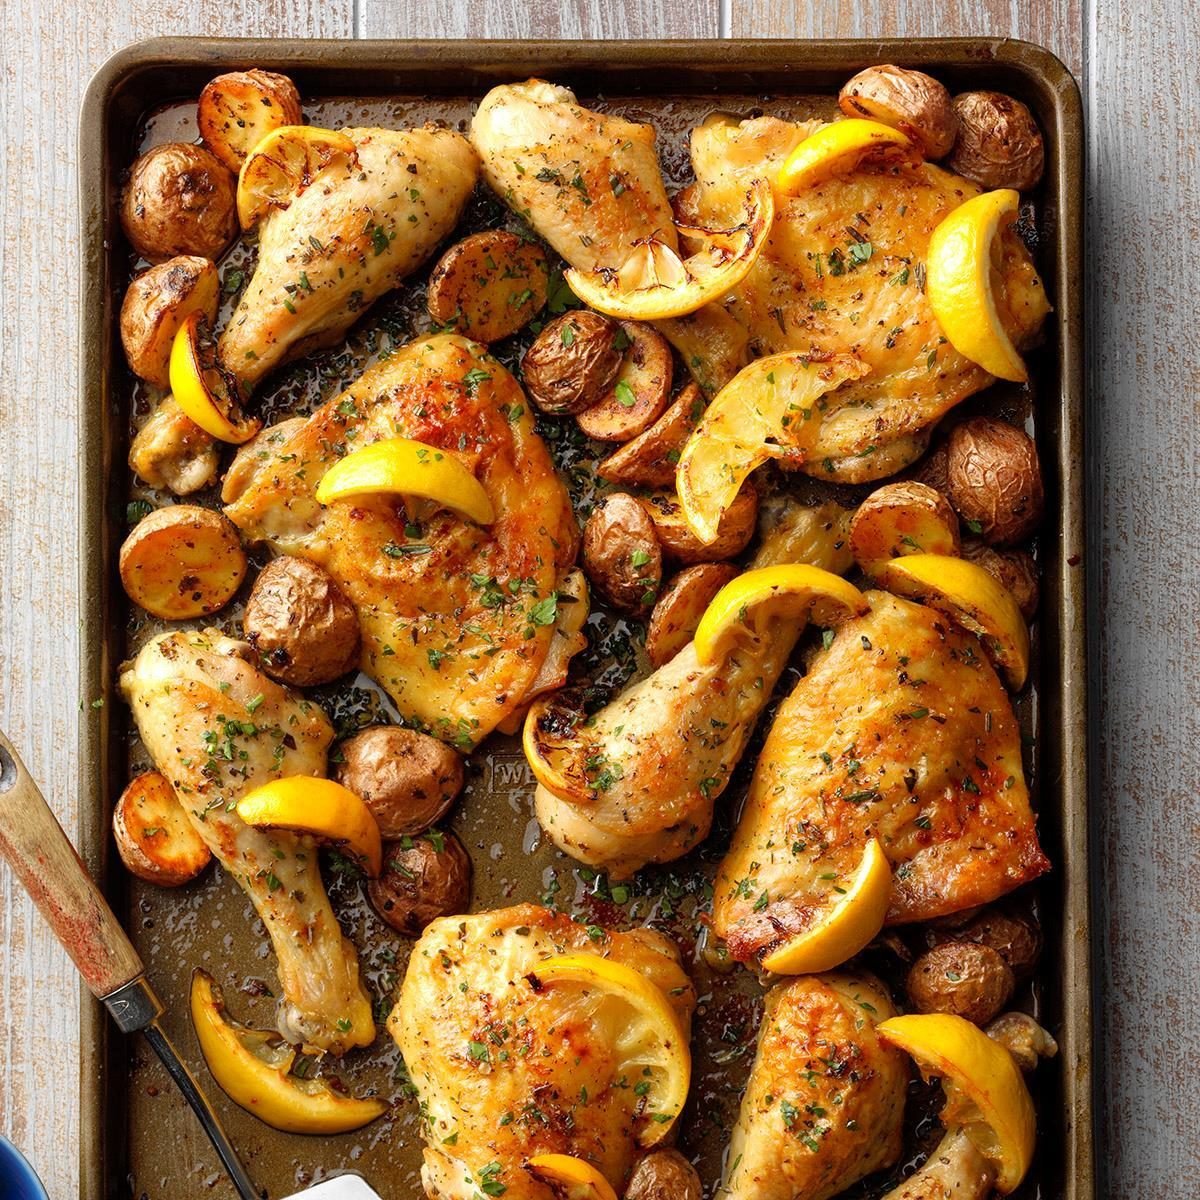 10 Healthy Sheet Pan Meals To Try For Easy Dinners and Lunches